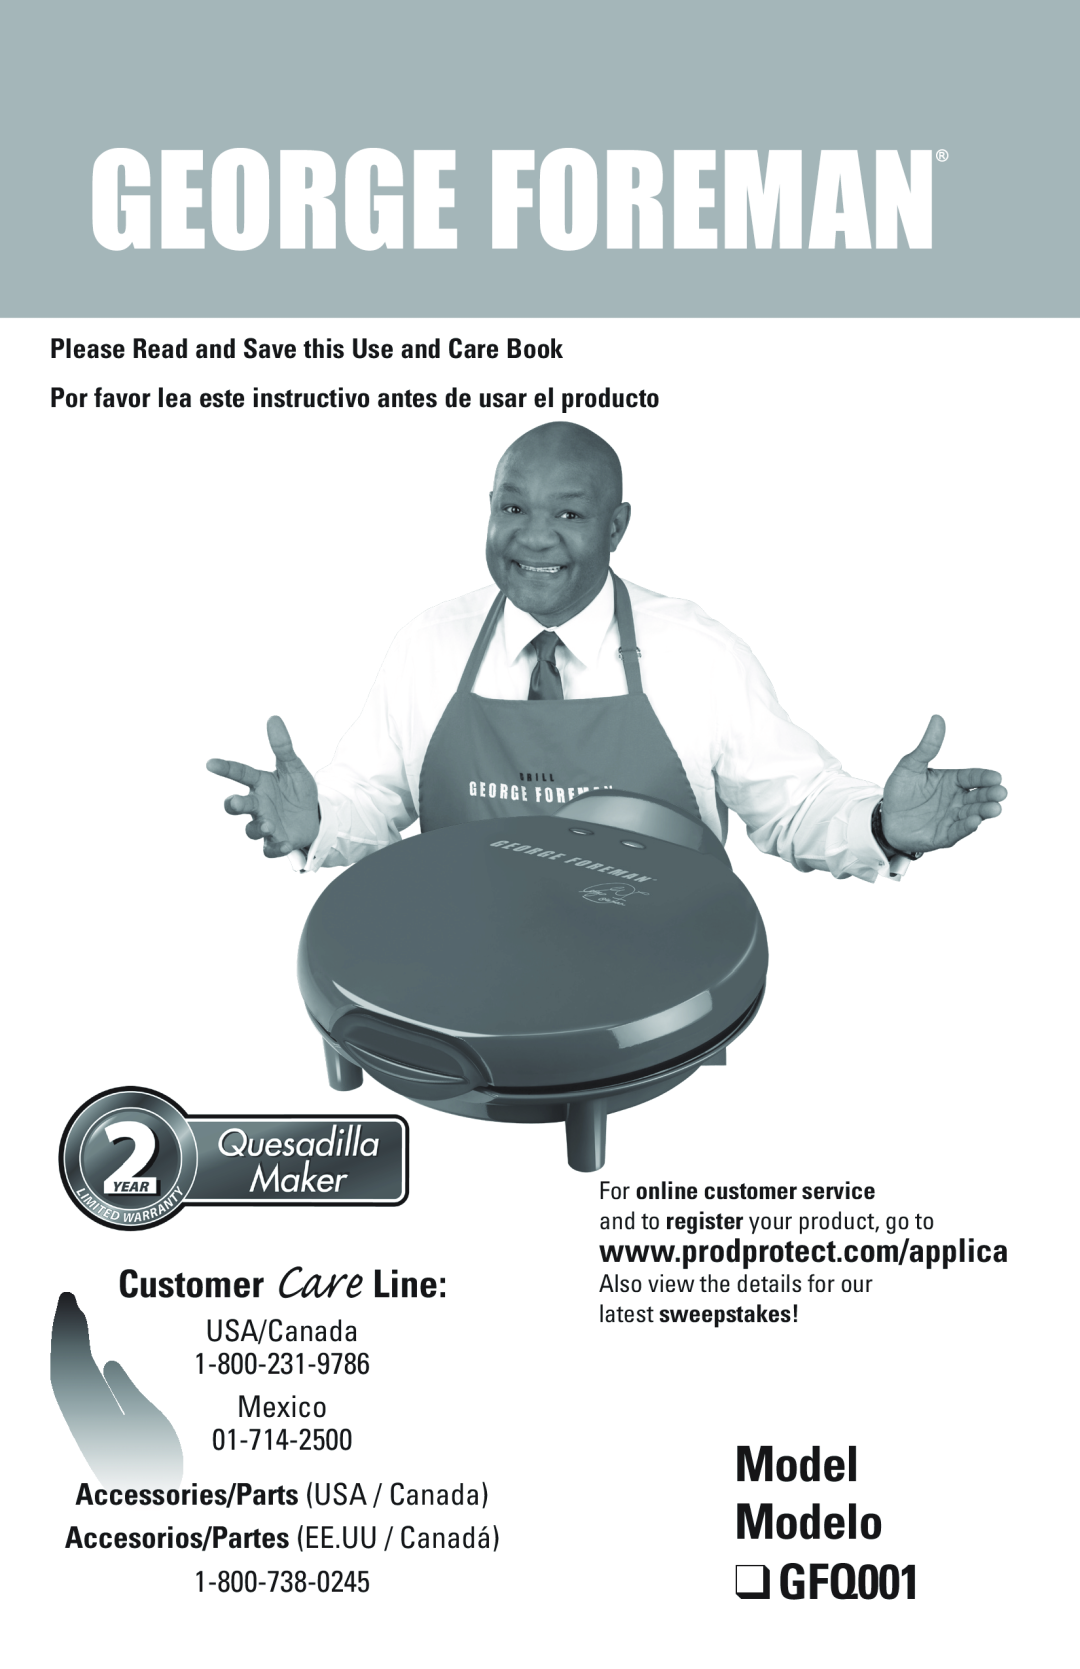 George Foreman GFQ001 manual Modelo, Mexico, Please Read and Save this Use and Care Book, Customer Care Line 